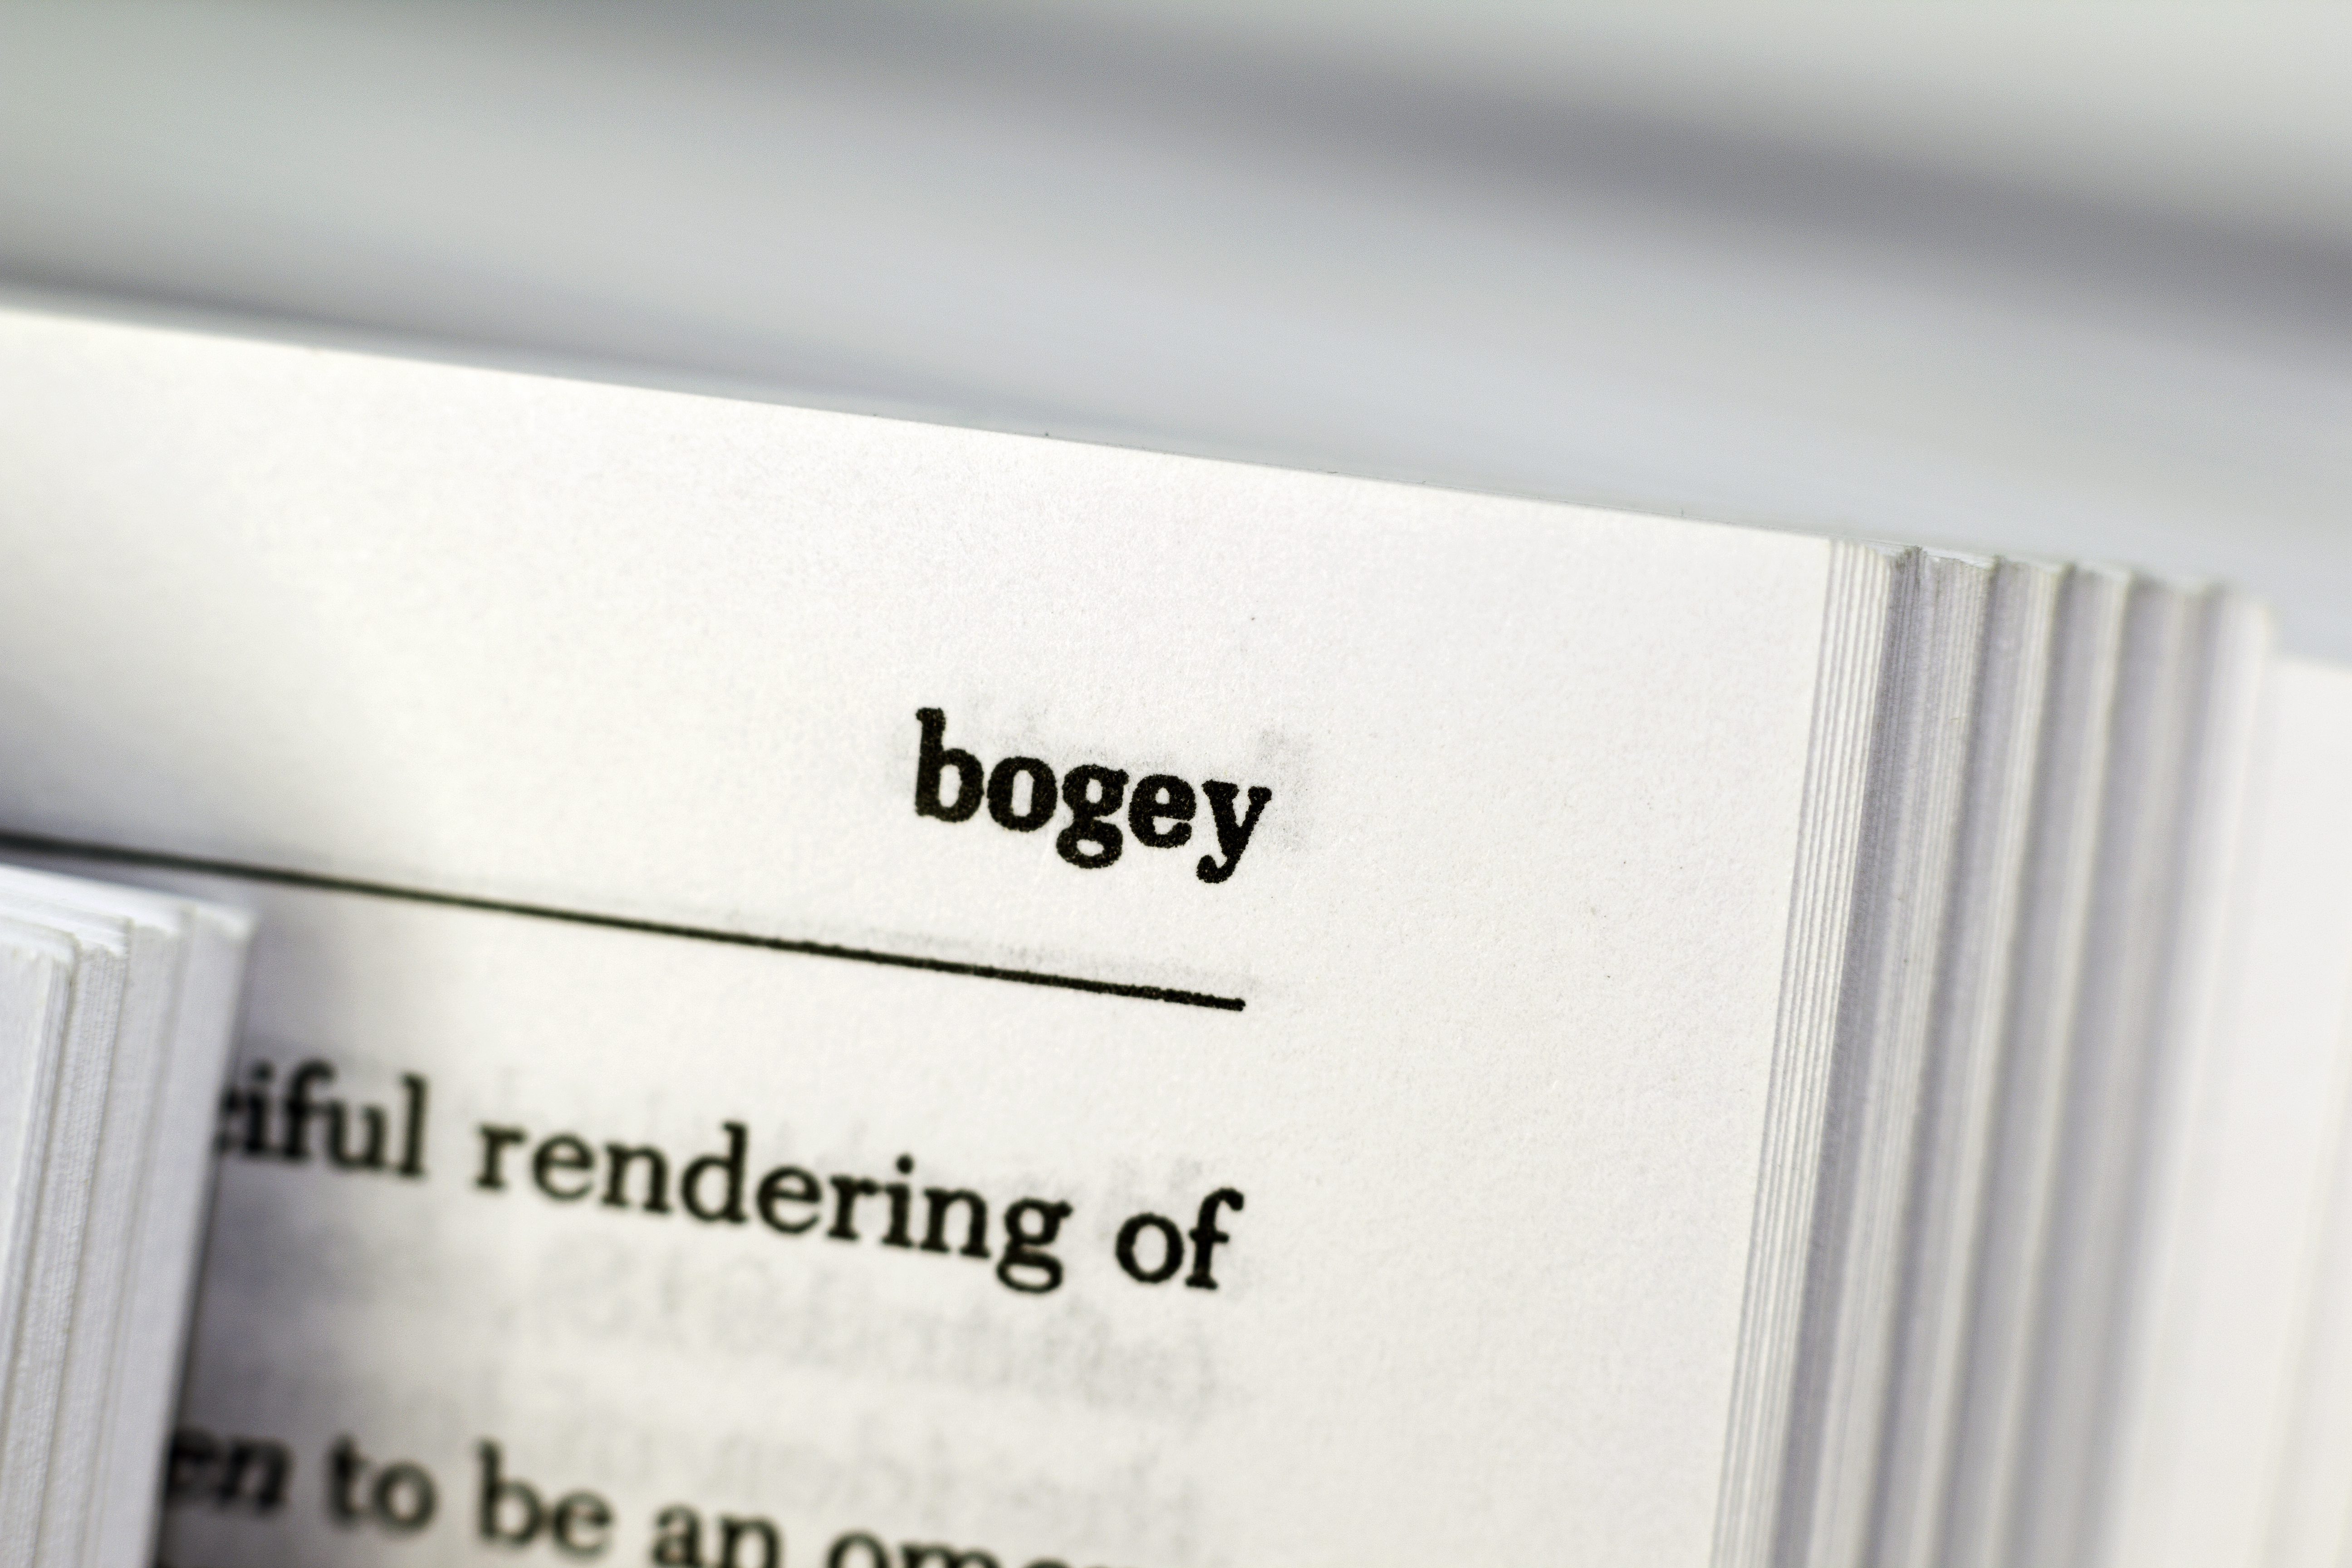 Bogey definition in dictionary zoomed in